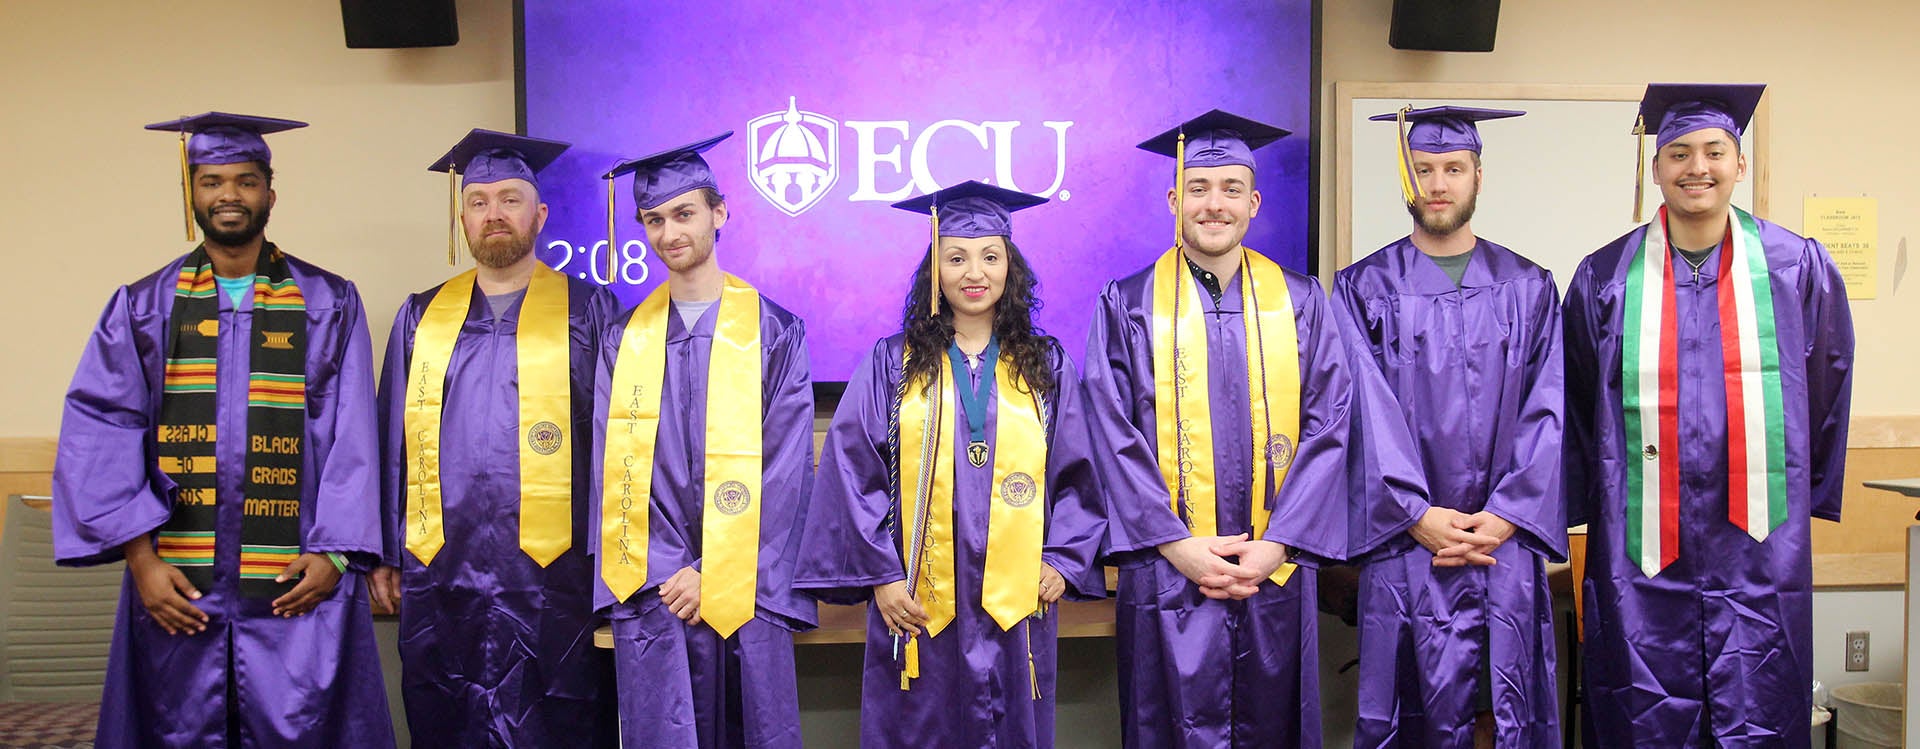 ECU software engineering graduates, from left, Isaiah Wells, James Kinlaw, Ryon Gerringer, Maria Alexandra Ortiz, Alexander Baldauff, Jonathan Jones and Brandon Miranda pose for a picture inside their capstone classroom in the Bate Building. They are the first class of graduates in the Department of Computer Science's Bachelor of Science in software engineering program. (Photos by Ken Buday)